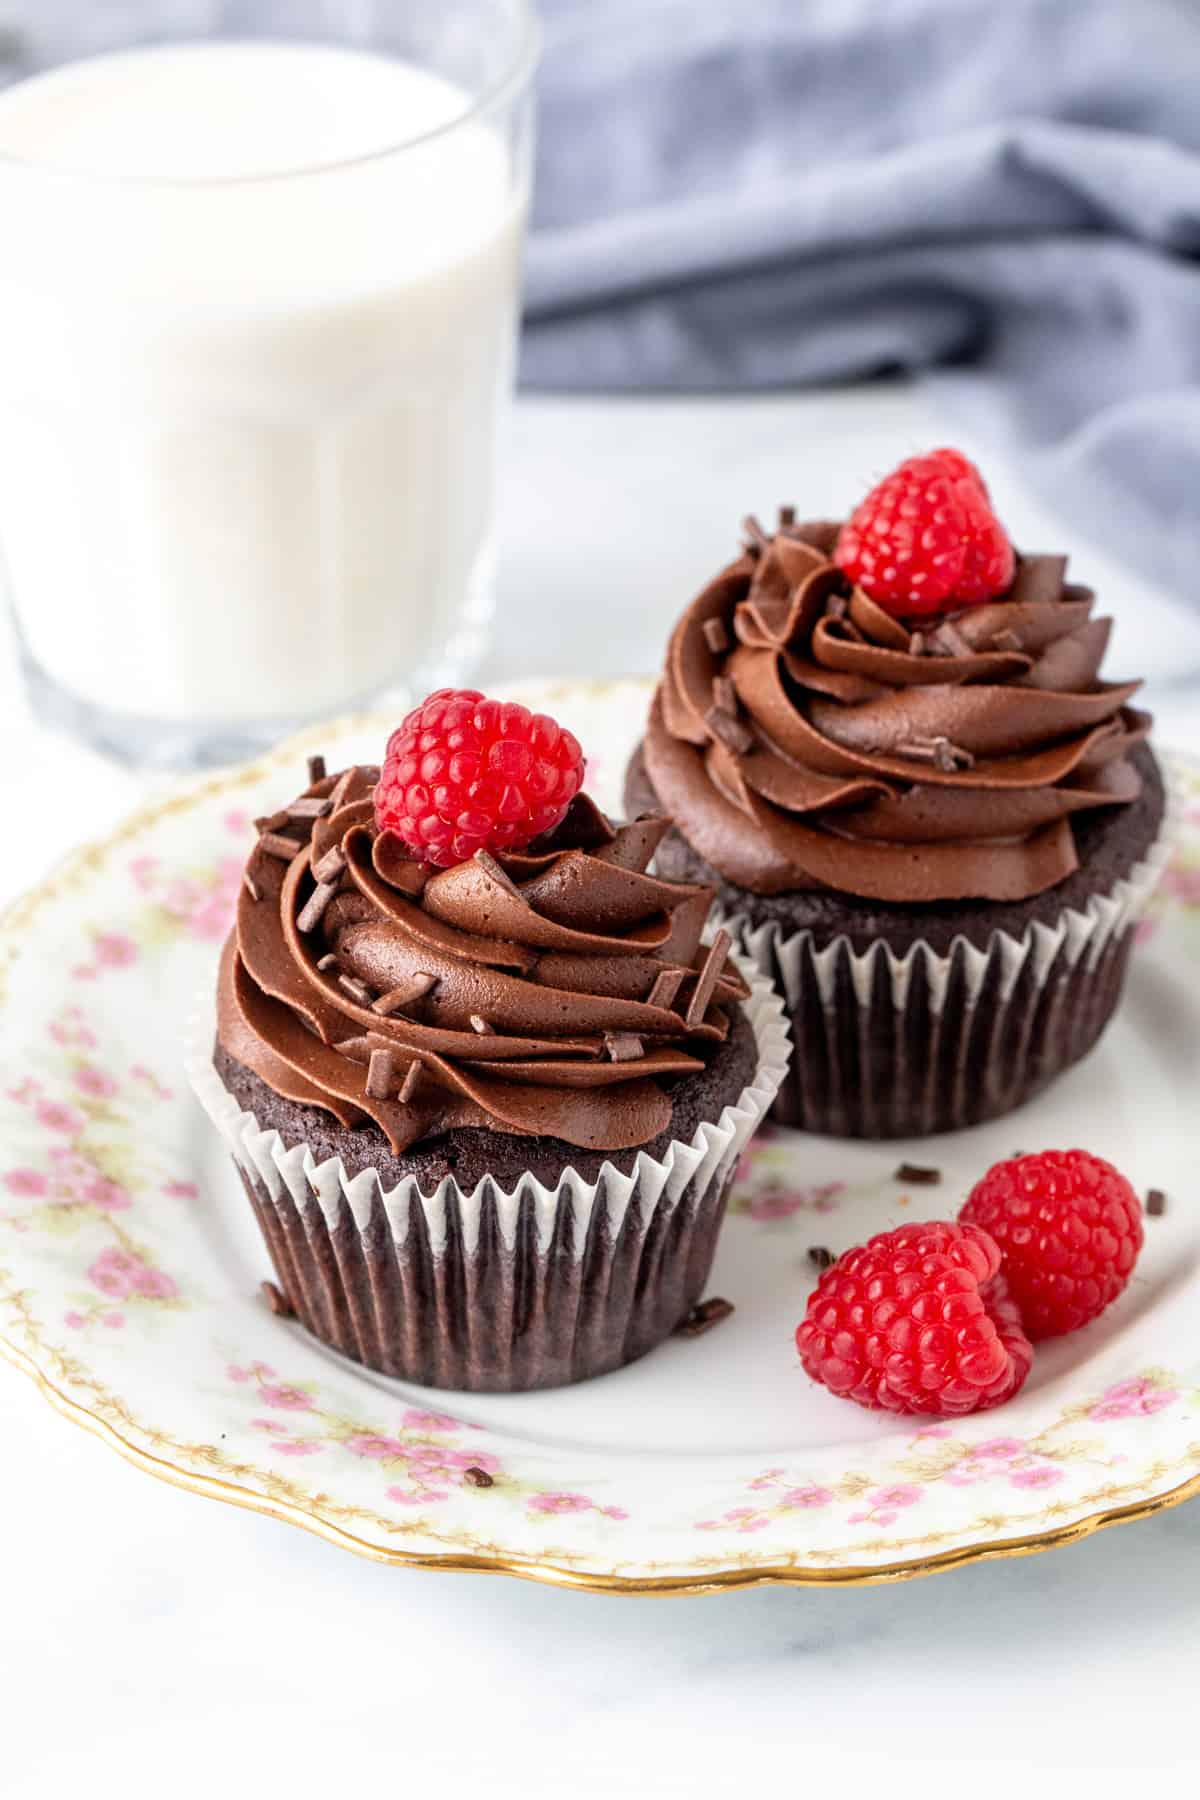 Two chocolate cupcakes on a plate with glass of milk